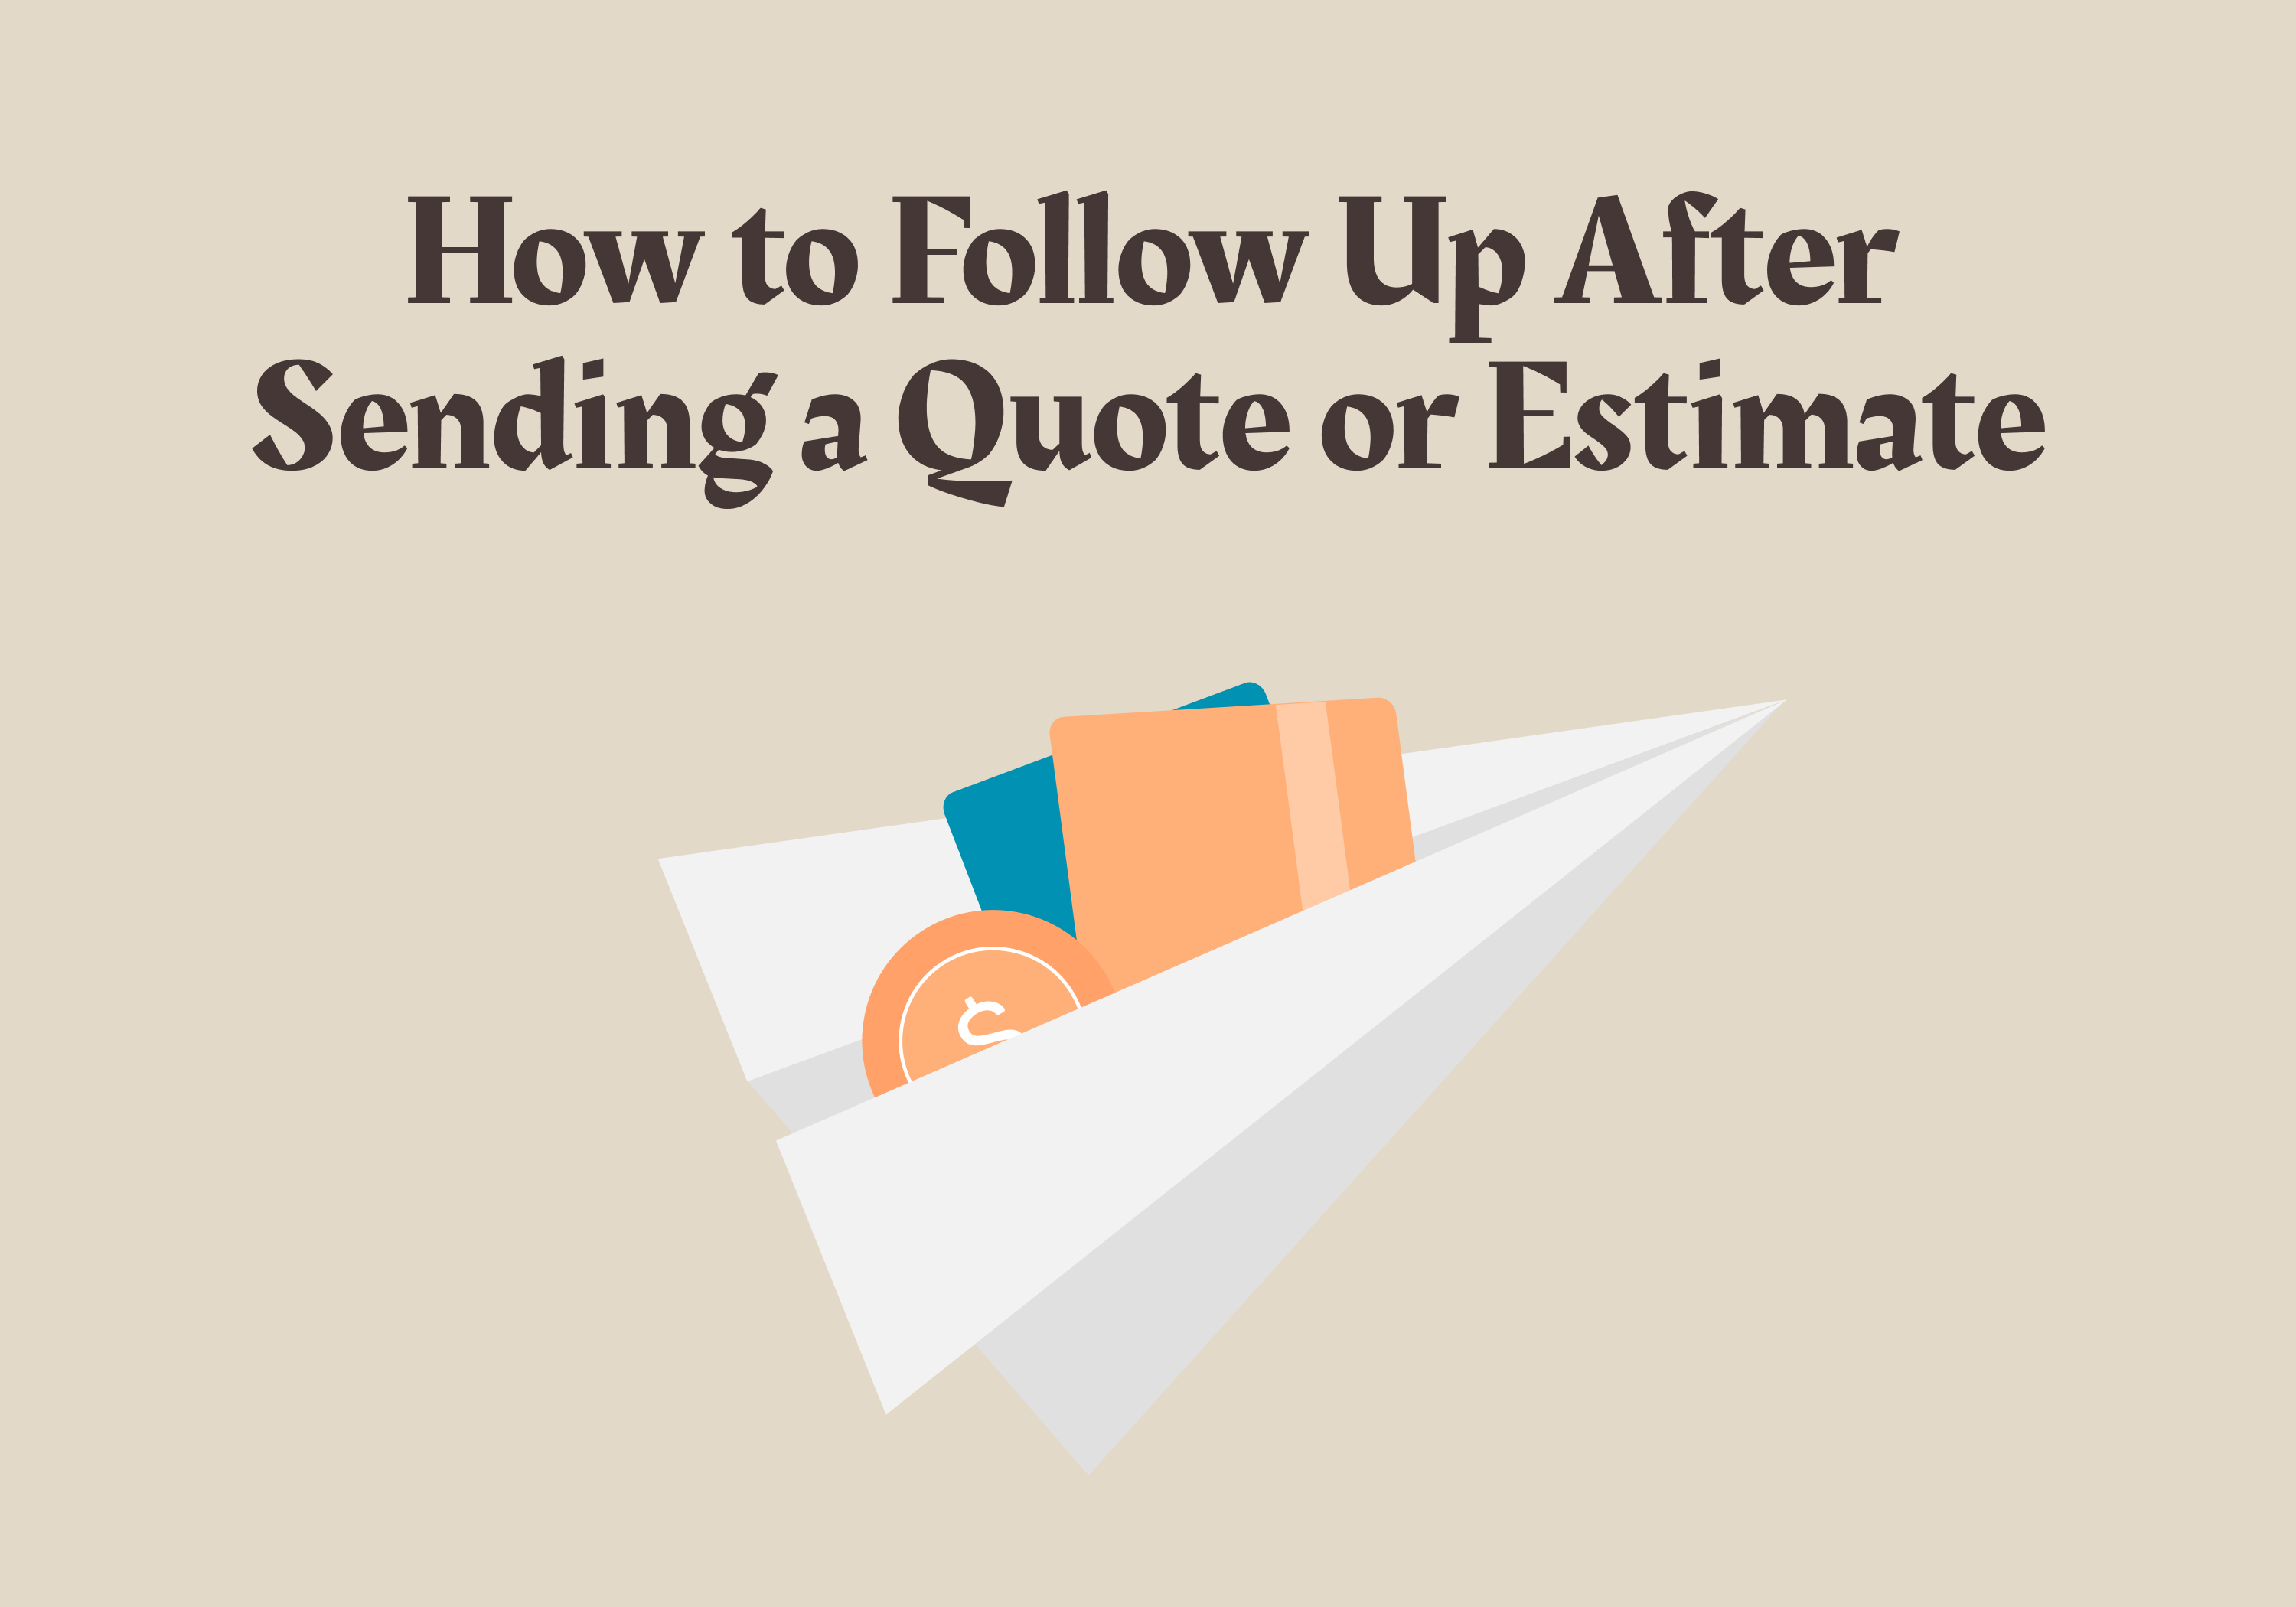 How to Follow Up After Sending a Quote or Estimate